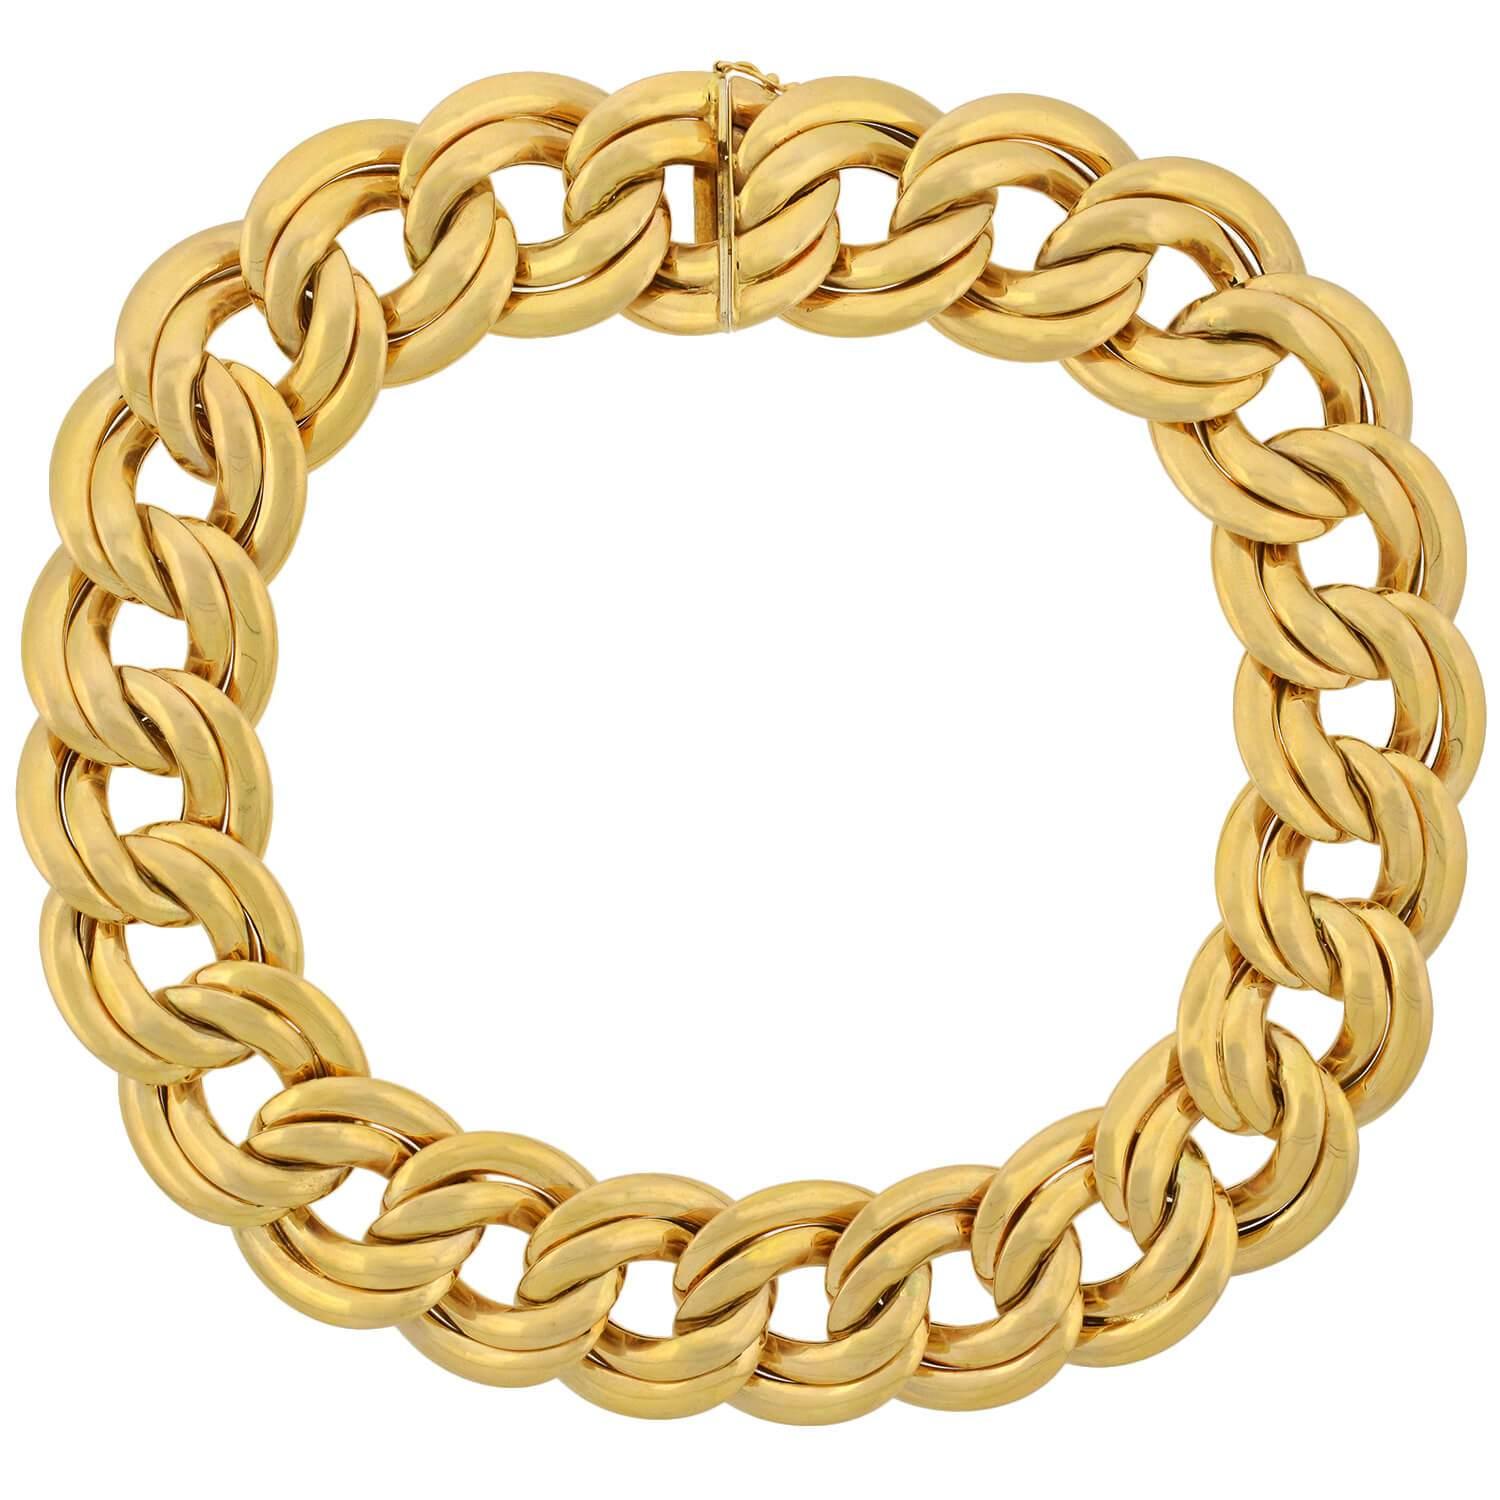 An absolutely stunning Vintage double Cuban link chain necklace with a bold and stylish look! Crafted in vibrant 14kt yellow gold, this statement necklace is comprised of large double rings that form a classic Cuban link pattern. The flat links